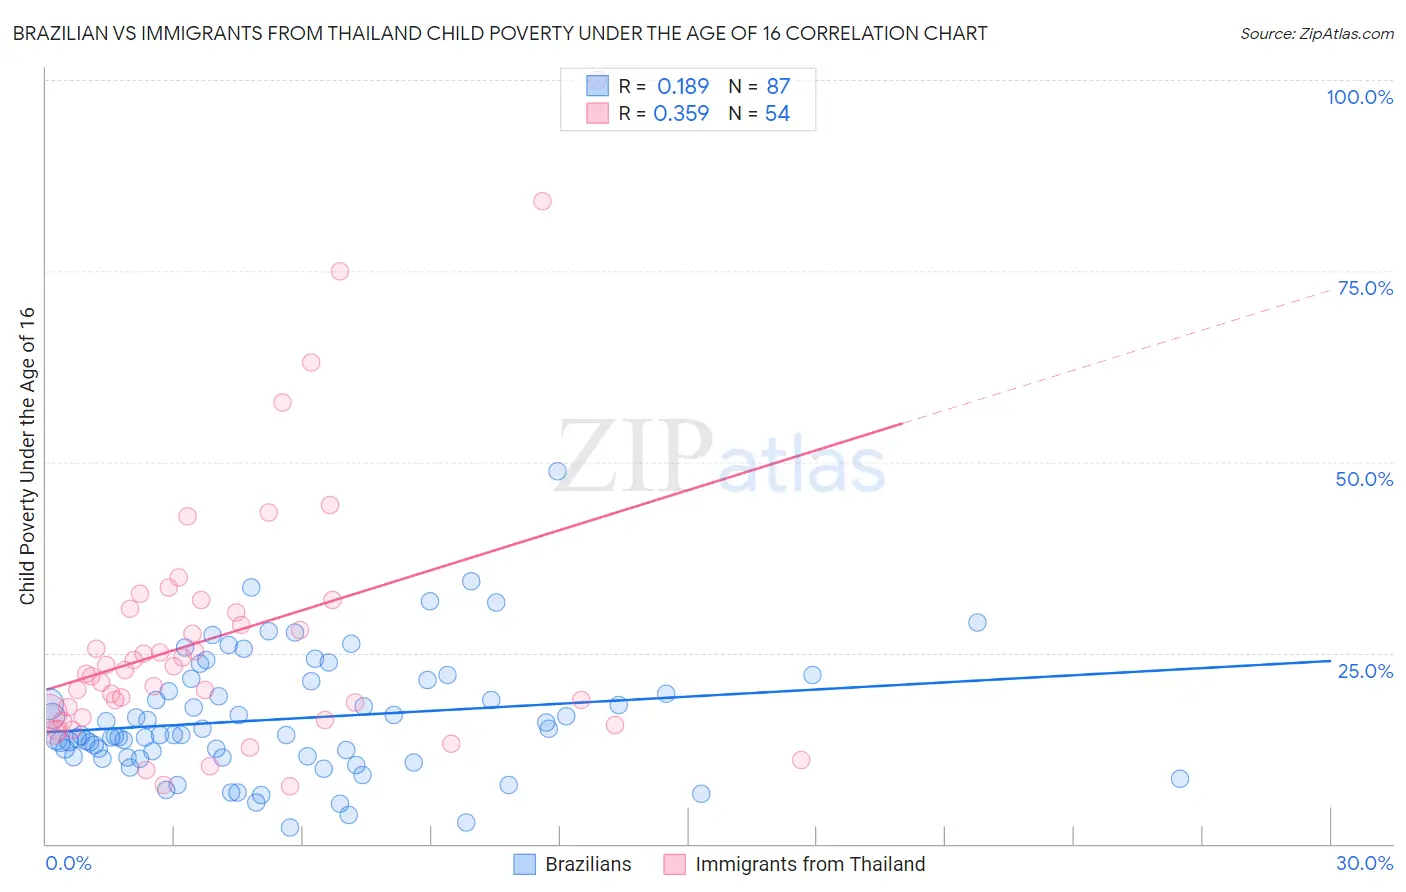 Brazilian vs Immigrants from Thailand Child Poverty Under the Age of 16